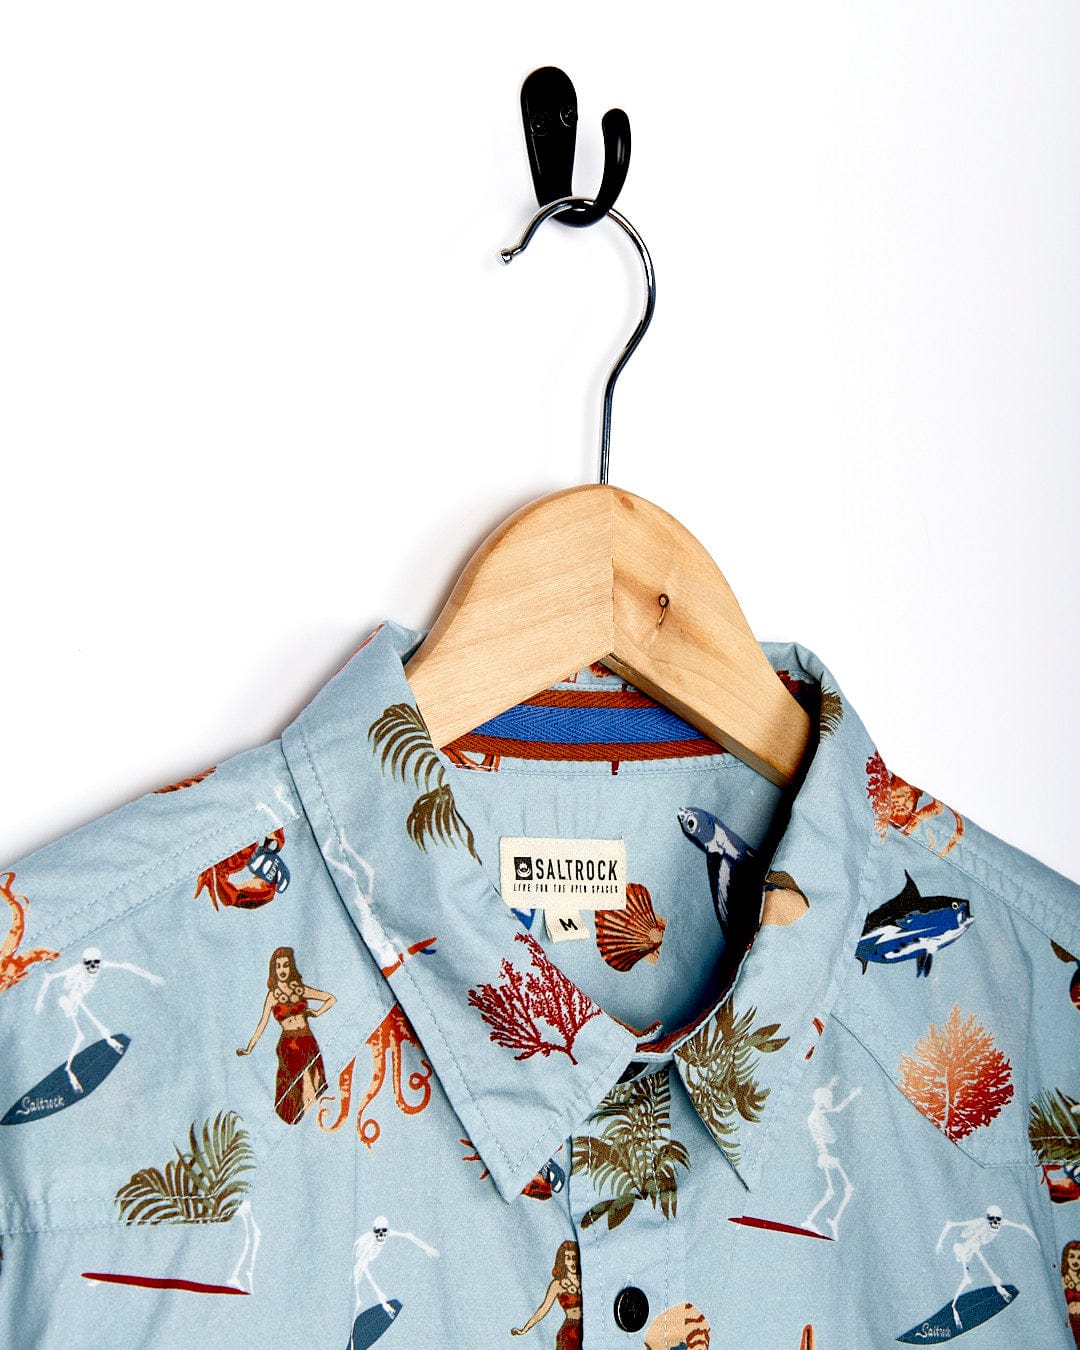 Embrace the Ruan - Mens Washed Short Sleeve Shirt from Saltrock for some funky-shirt holiday vibes.